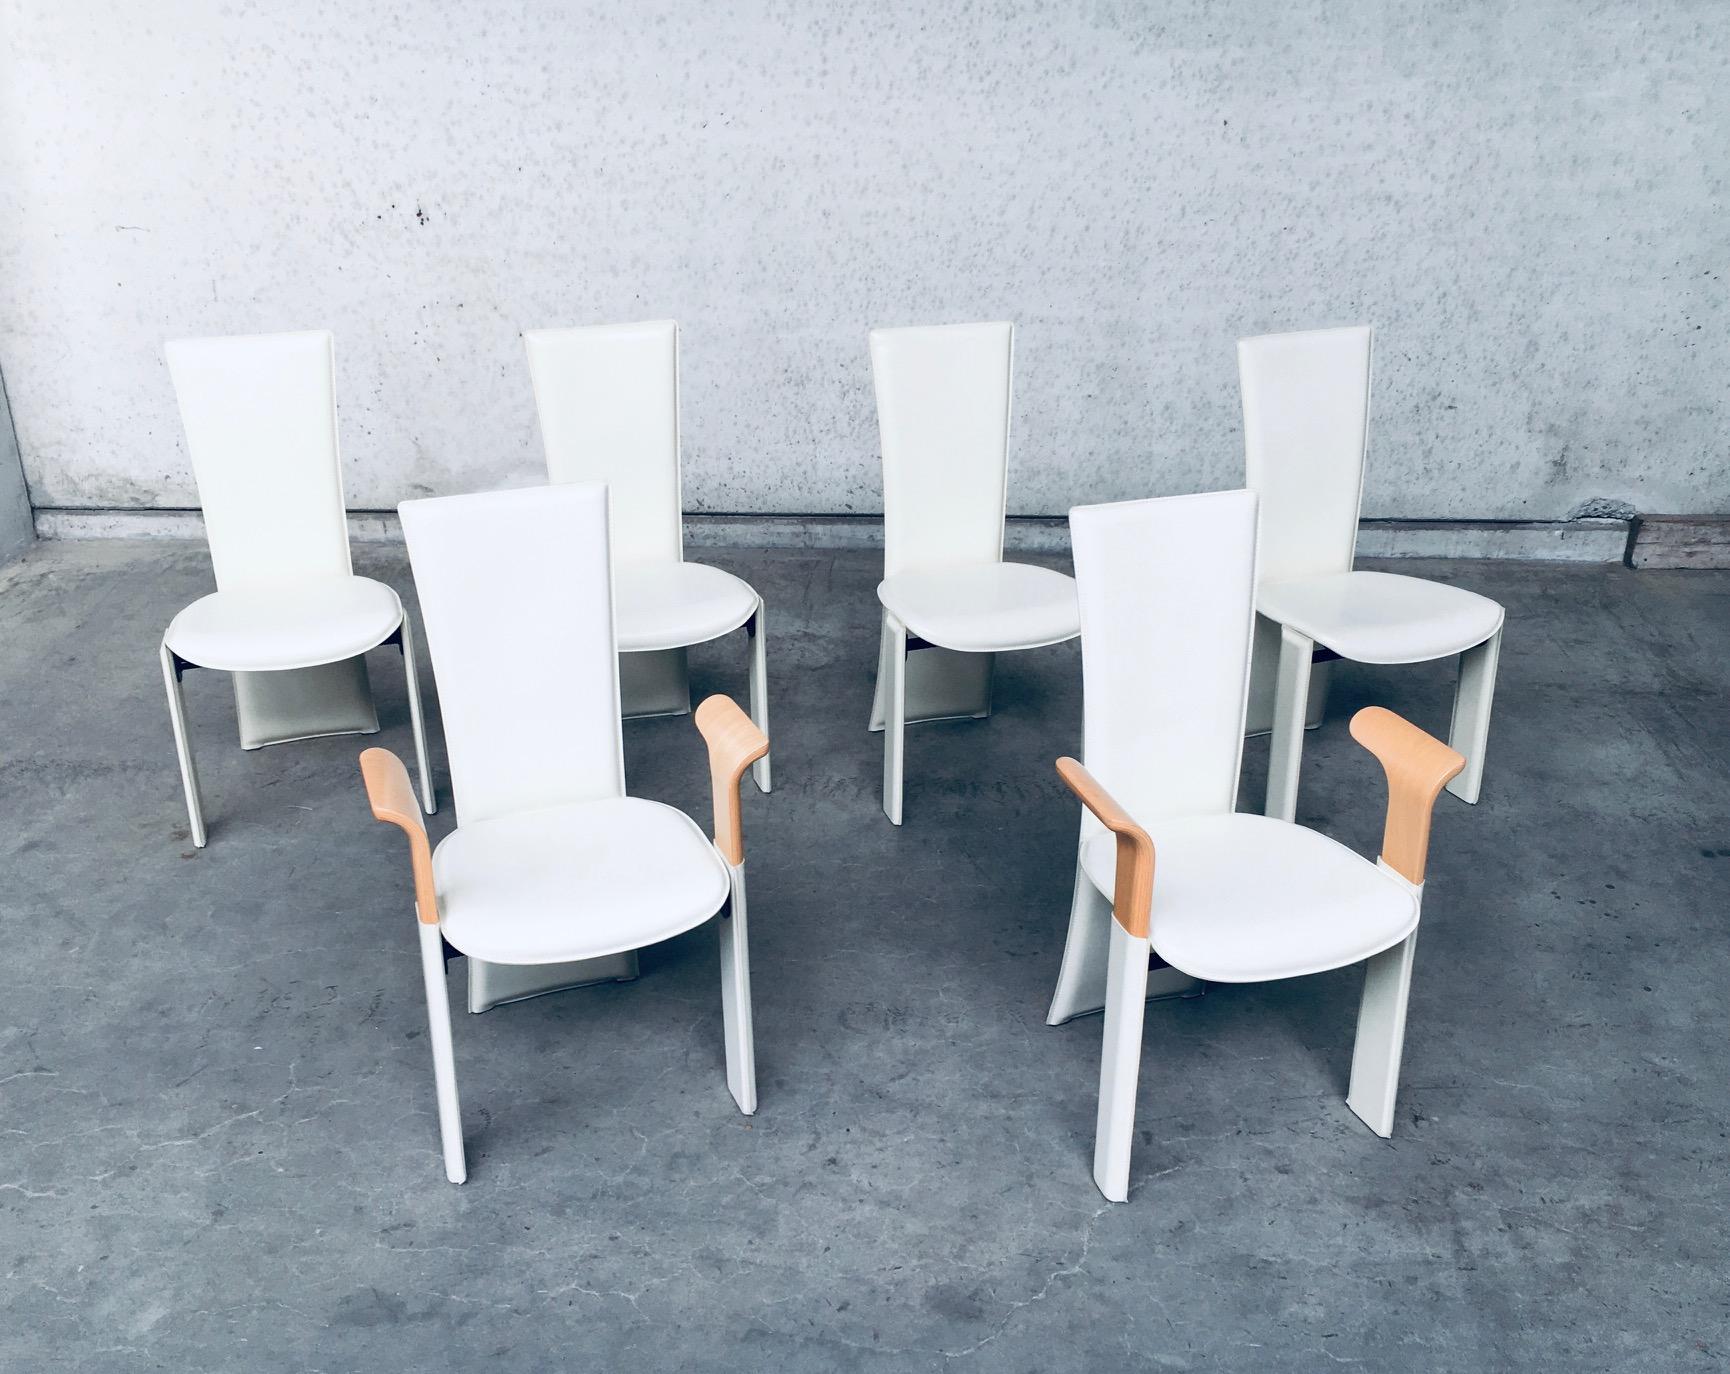 Late 20th Century Postmodern Design Dining Chair set by Pietro Costantini, Italy 1980's